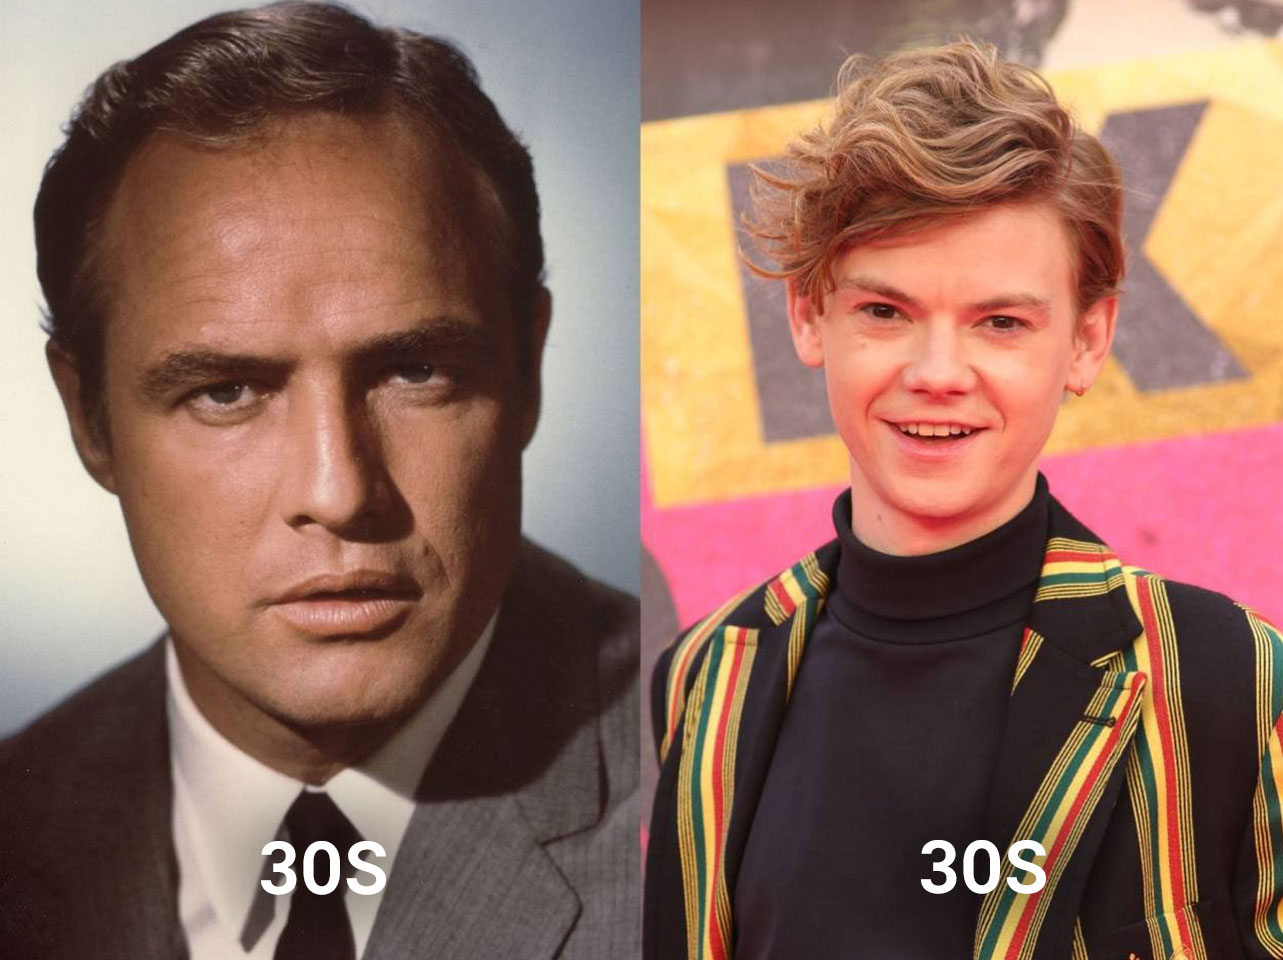 Marlon Brando [Left]. Thomas Brodie-Sangster [Right] | Source: Getty Images